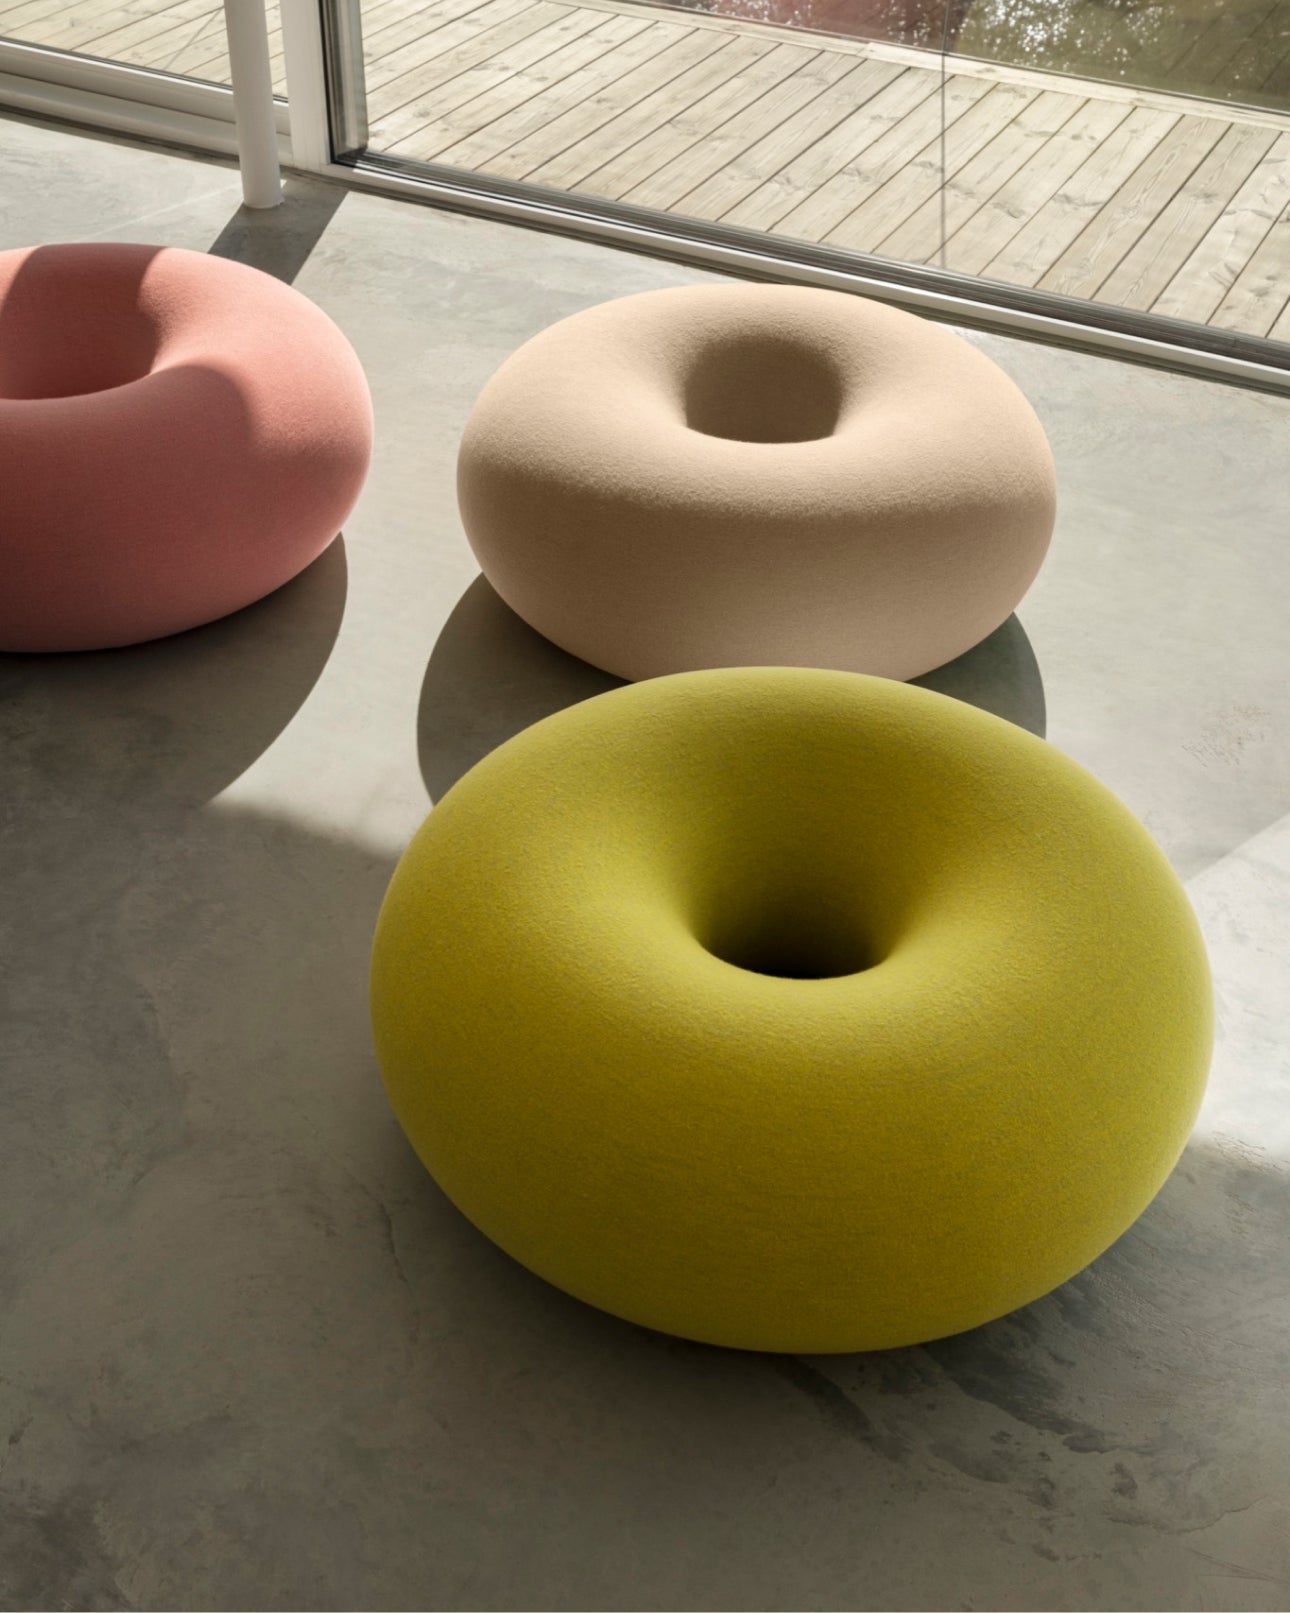 Three Boa Poufs with different colors: Sulfur, Cotton Candy and Oatmeal